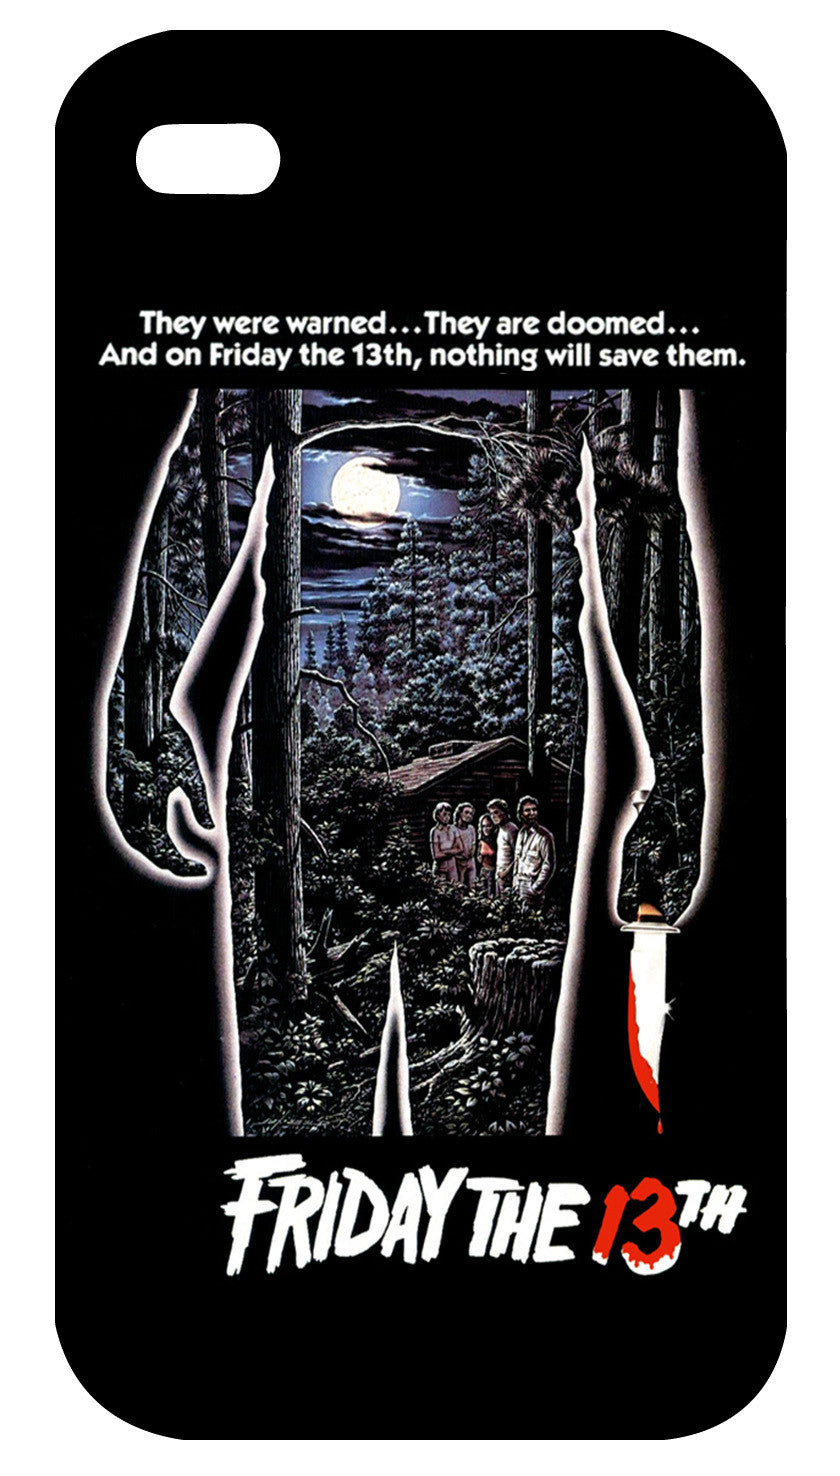 Friday the 13th iPhone 4/4S Case